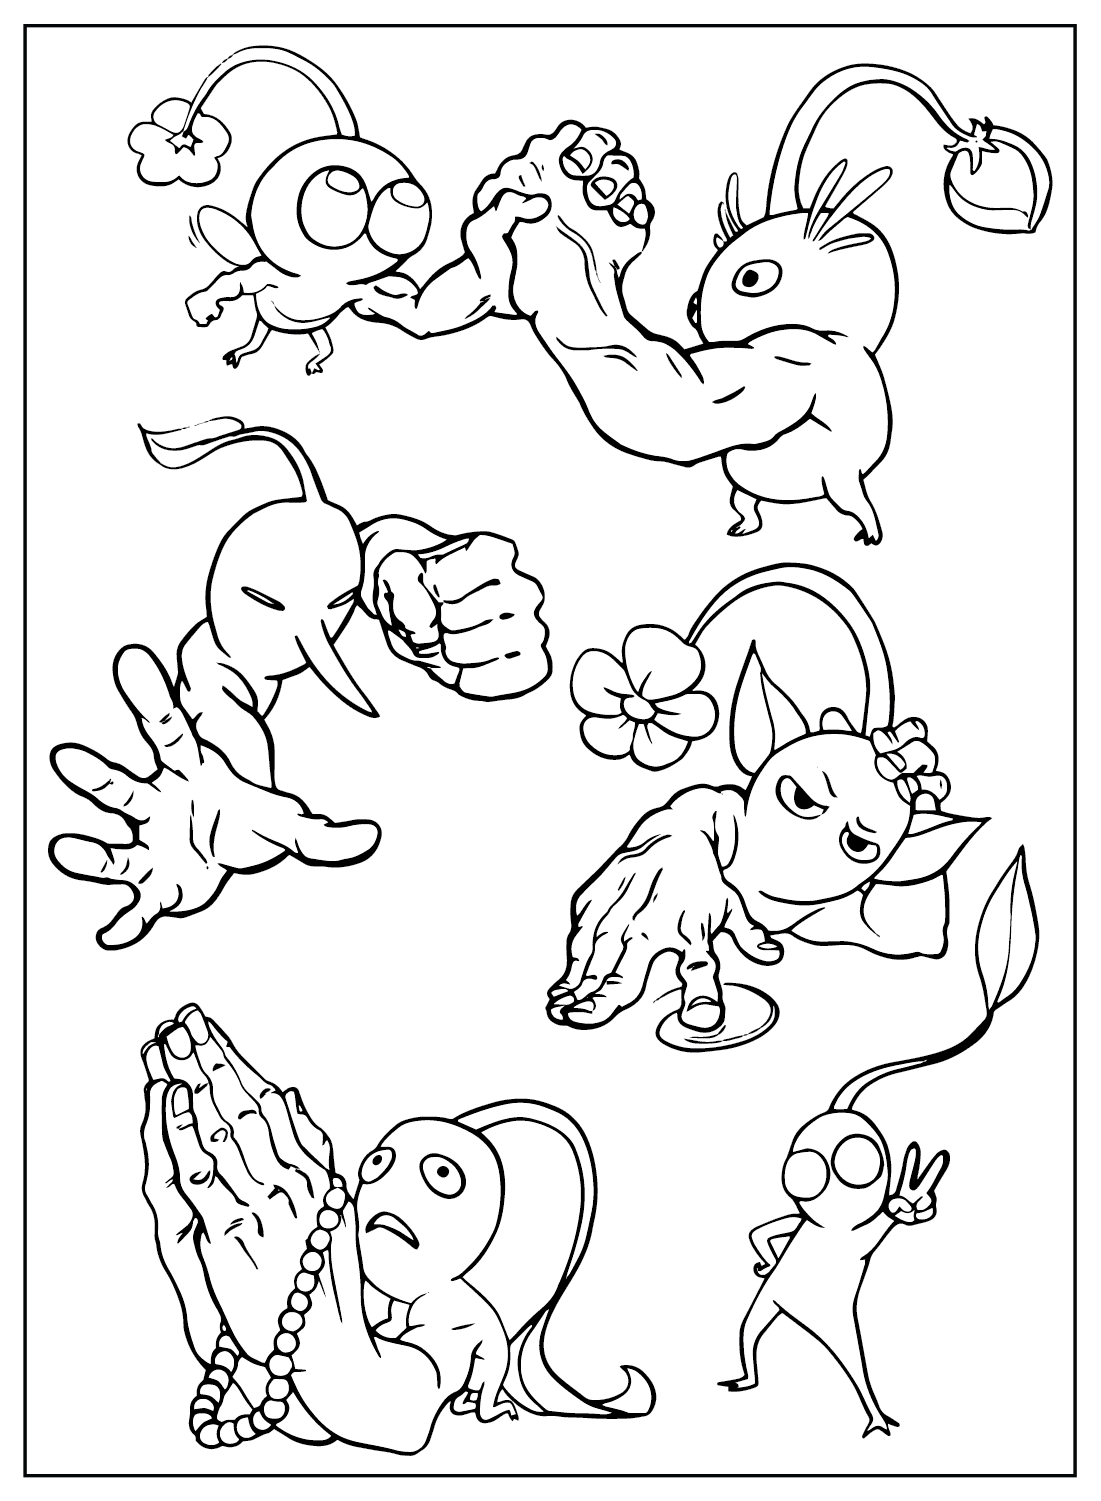 Pikmin Coloring Sheet for Kids from Pikmin